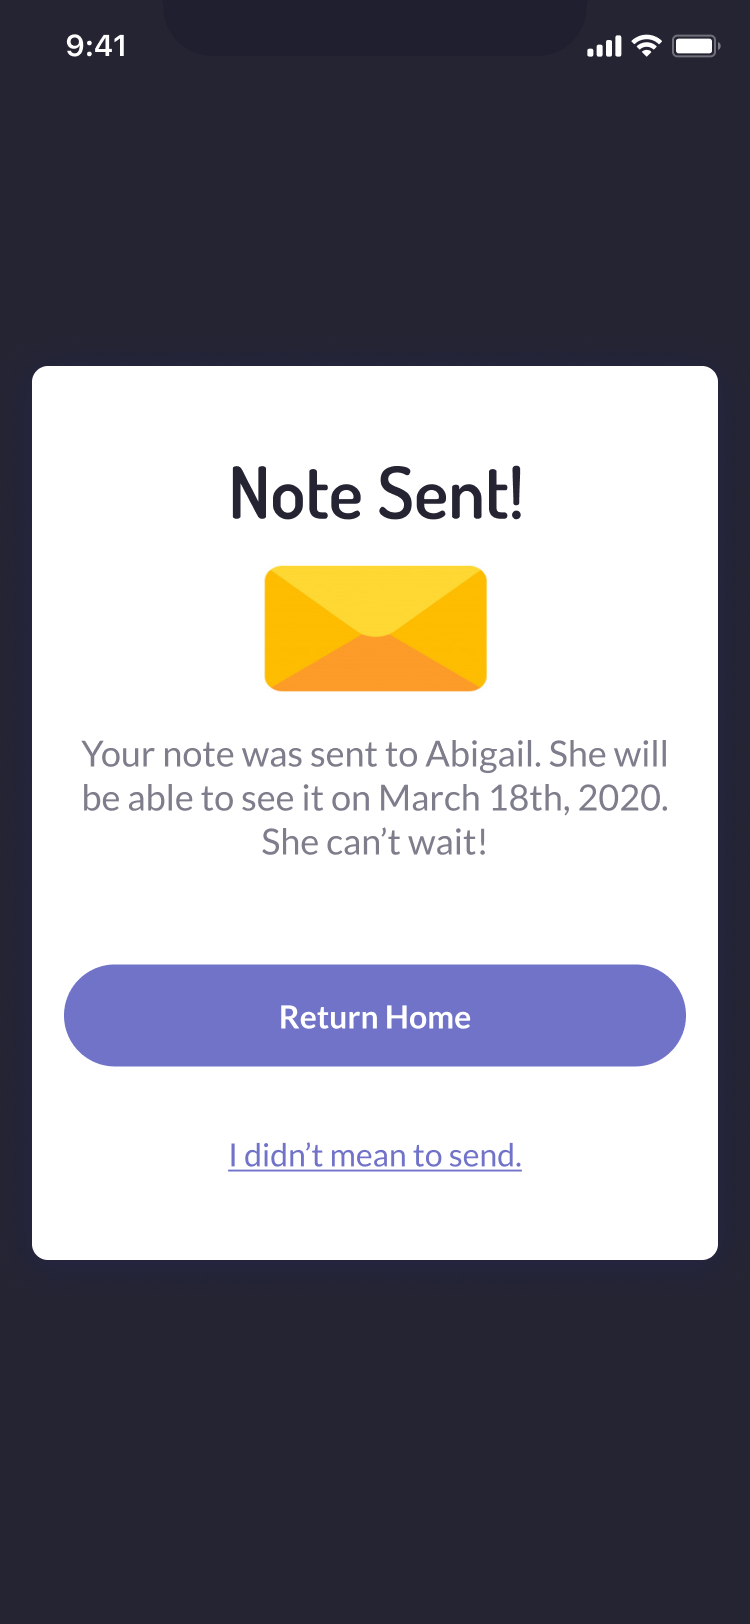 Note sent confirmation screen